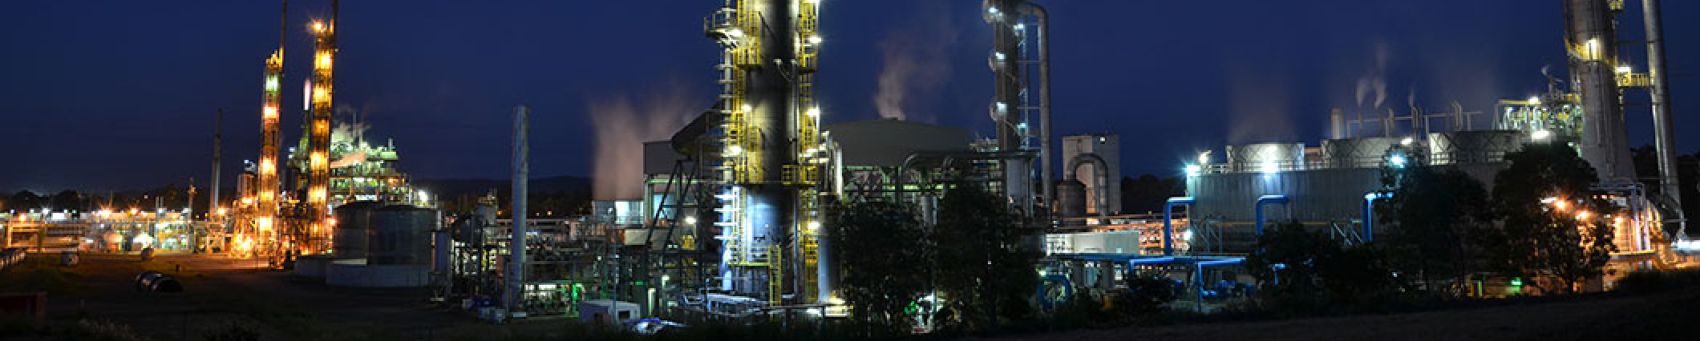 Image of industrial terminal